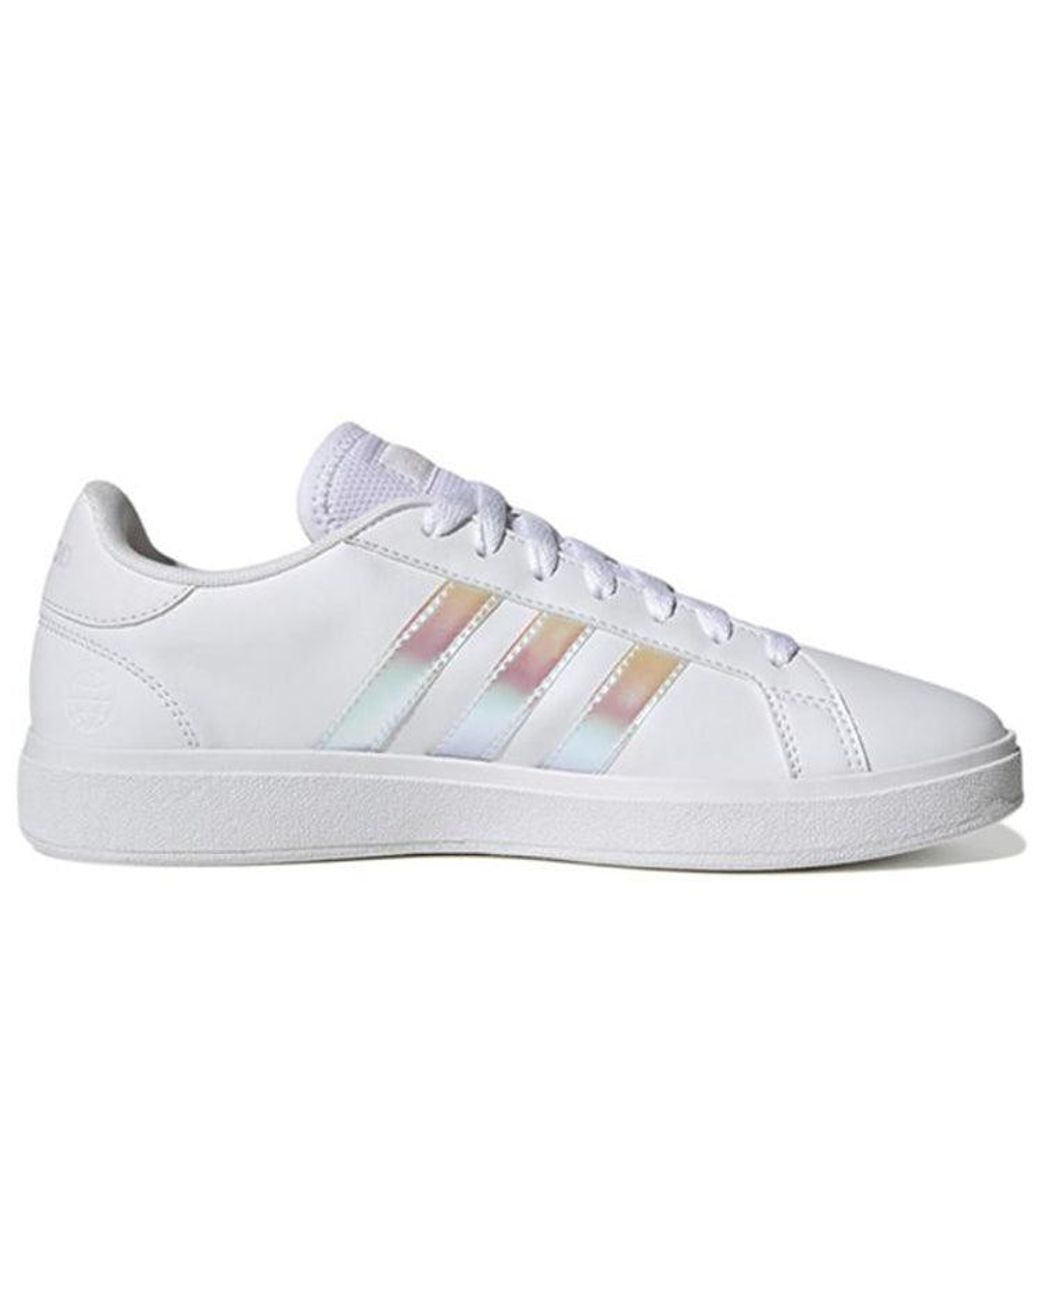 Adidas Neo Adidas Grand Court Td in White | Lyst